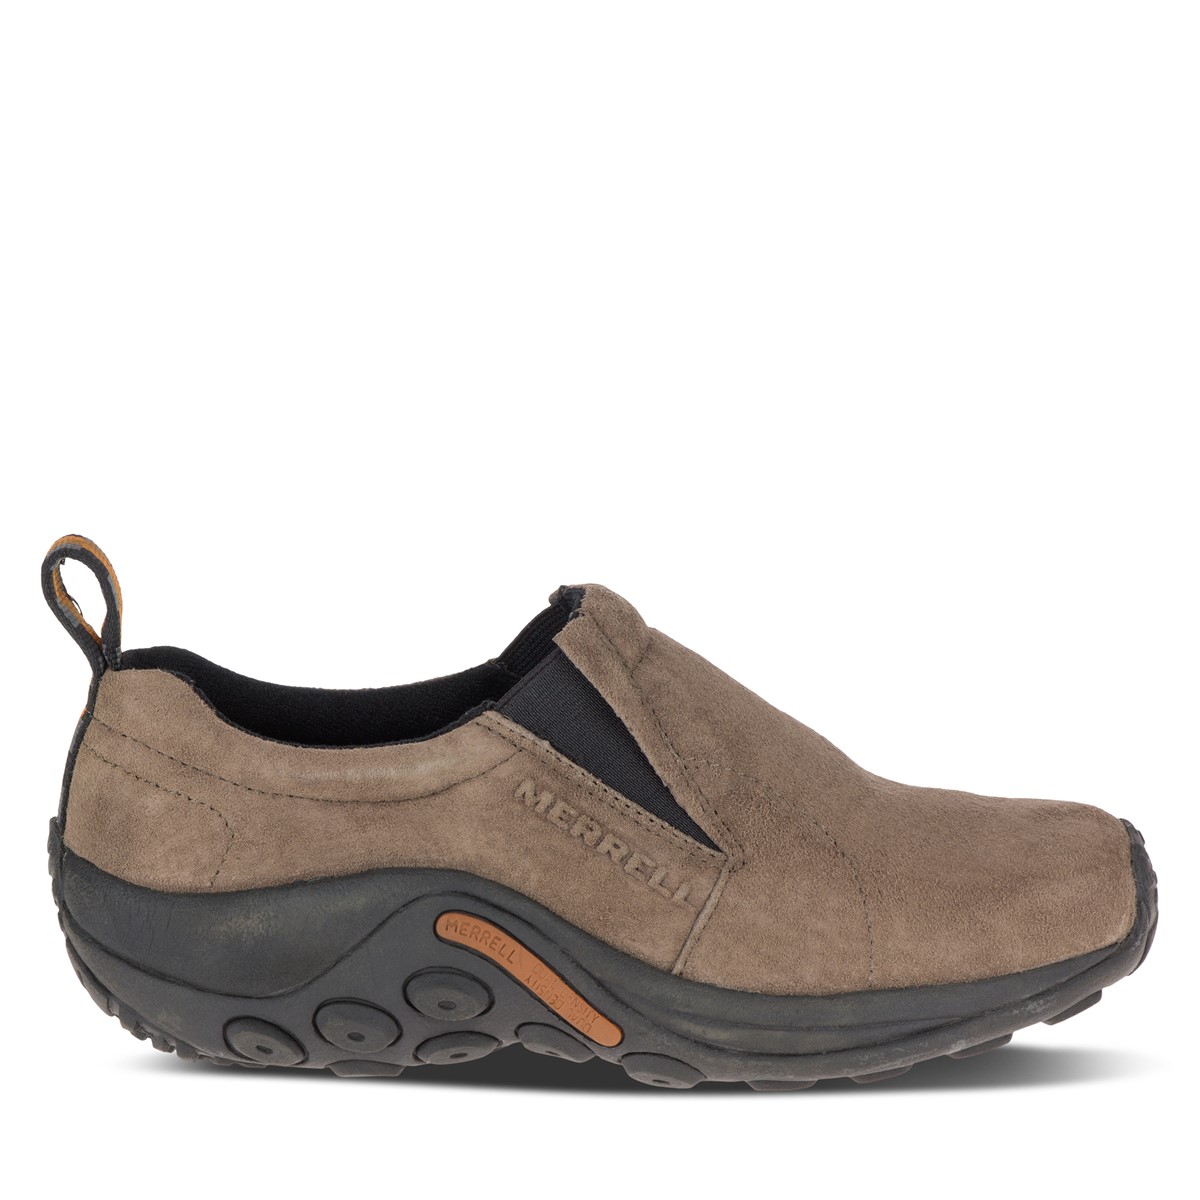 Women's Jungle Moc Slip-On Shoes in Brown